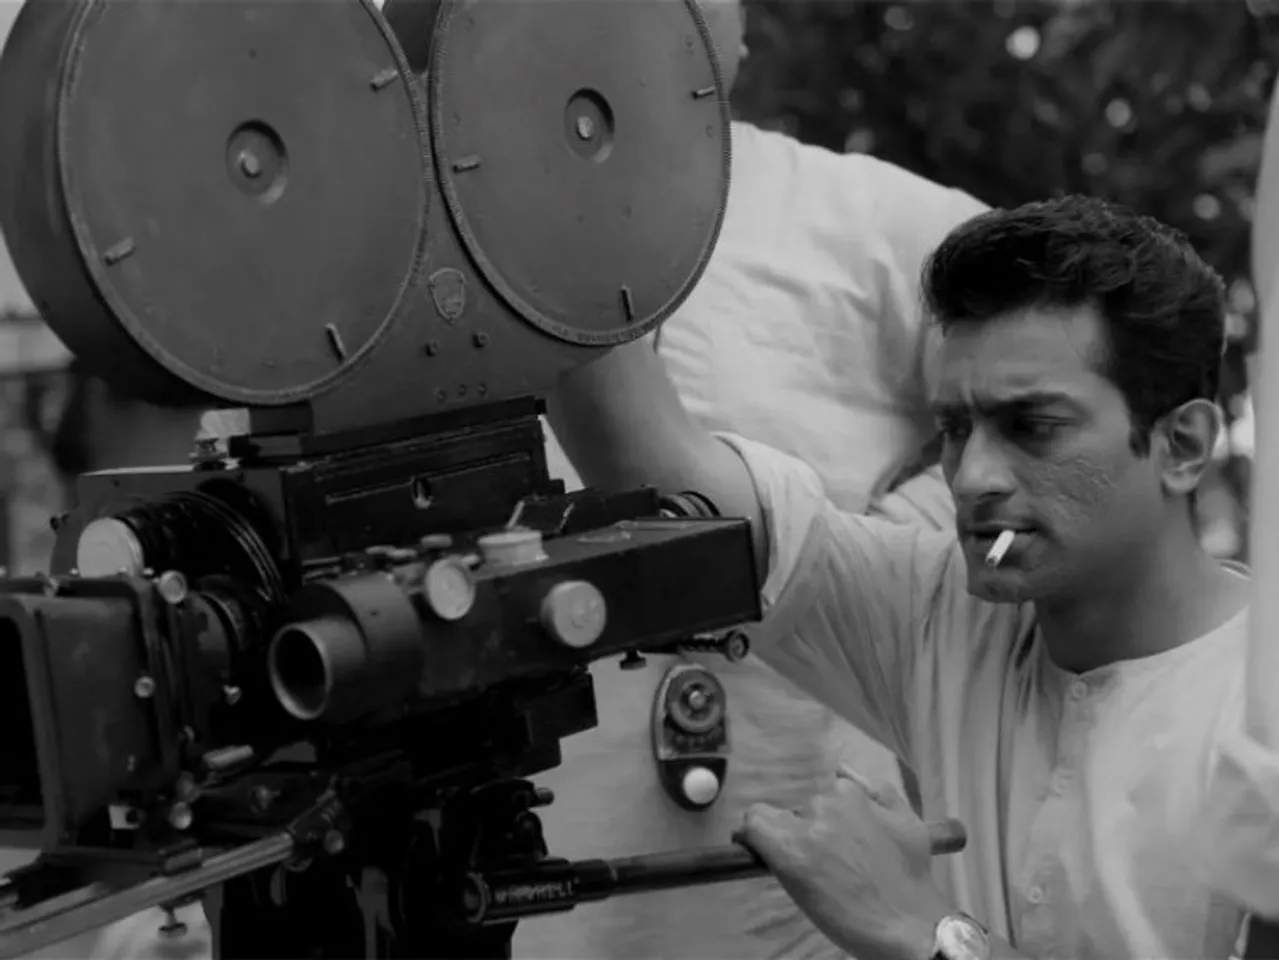 Bengali masterpiece 'Aparajito' based on the legendary director Satyajit Ray's journey of making cult classic